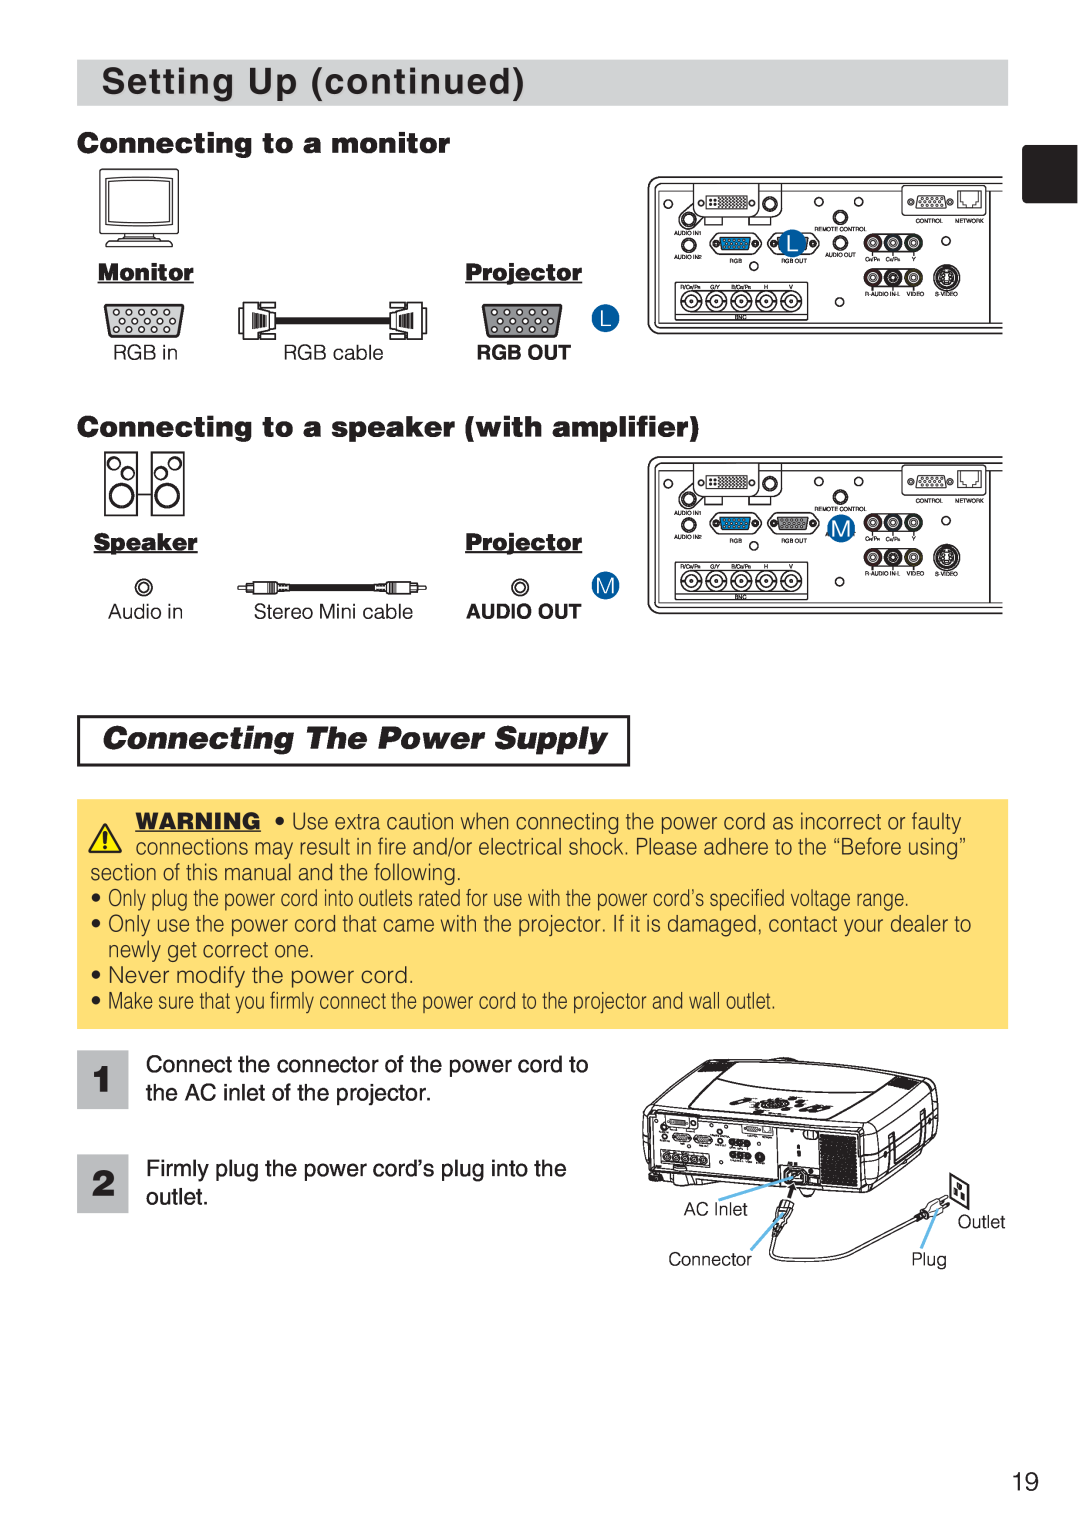 Toshiba TLP-SX3500 user manual Connecting The Power Supply, Setting Up continued, Connecting to a monitor, MonitorProjector 